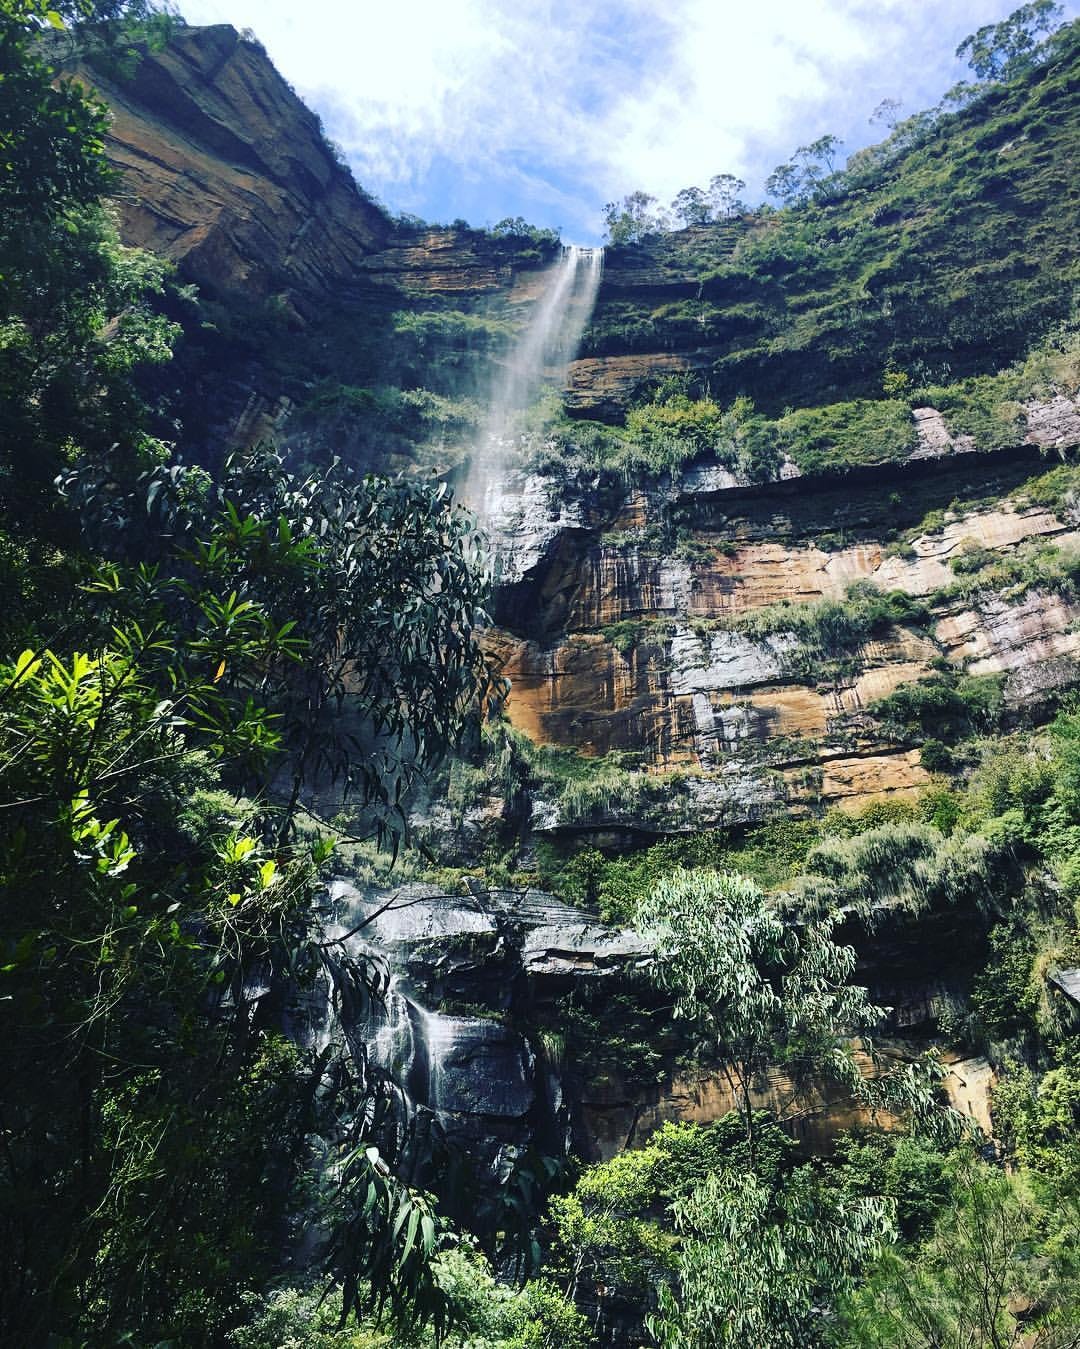 https%3A%2F%2Fsubstack post media.s3.amazonaws.com%2Fpublic%2Fimages%2F75aa600b 34b1 4802 8ccb The Grose Valley Hike, Blue Mountains, Australia